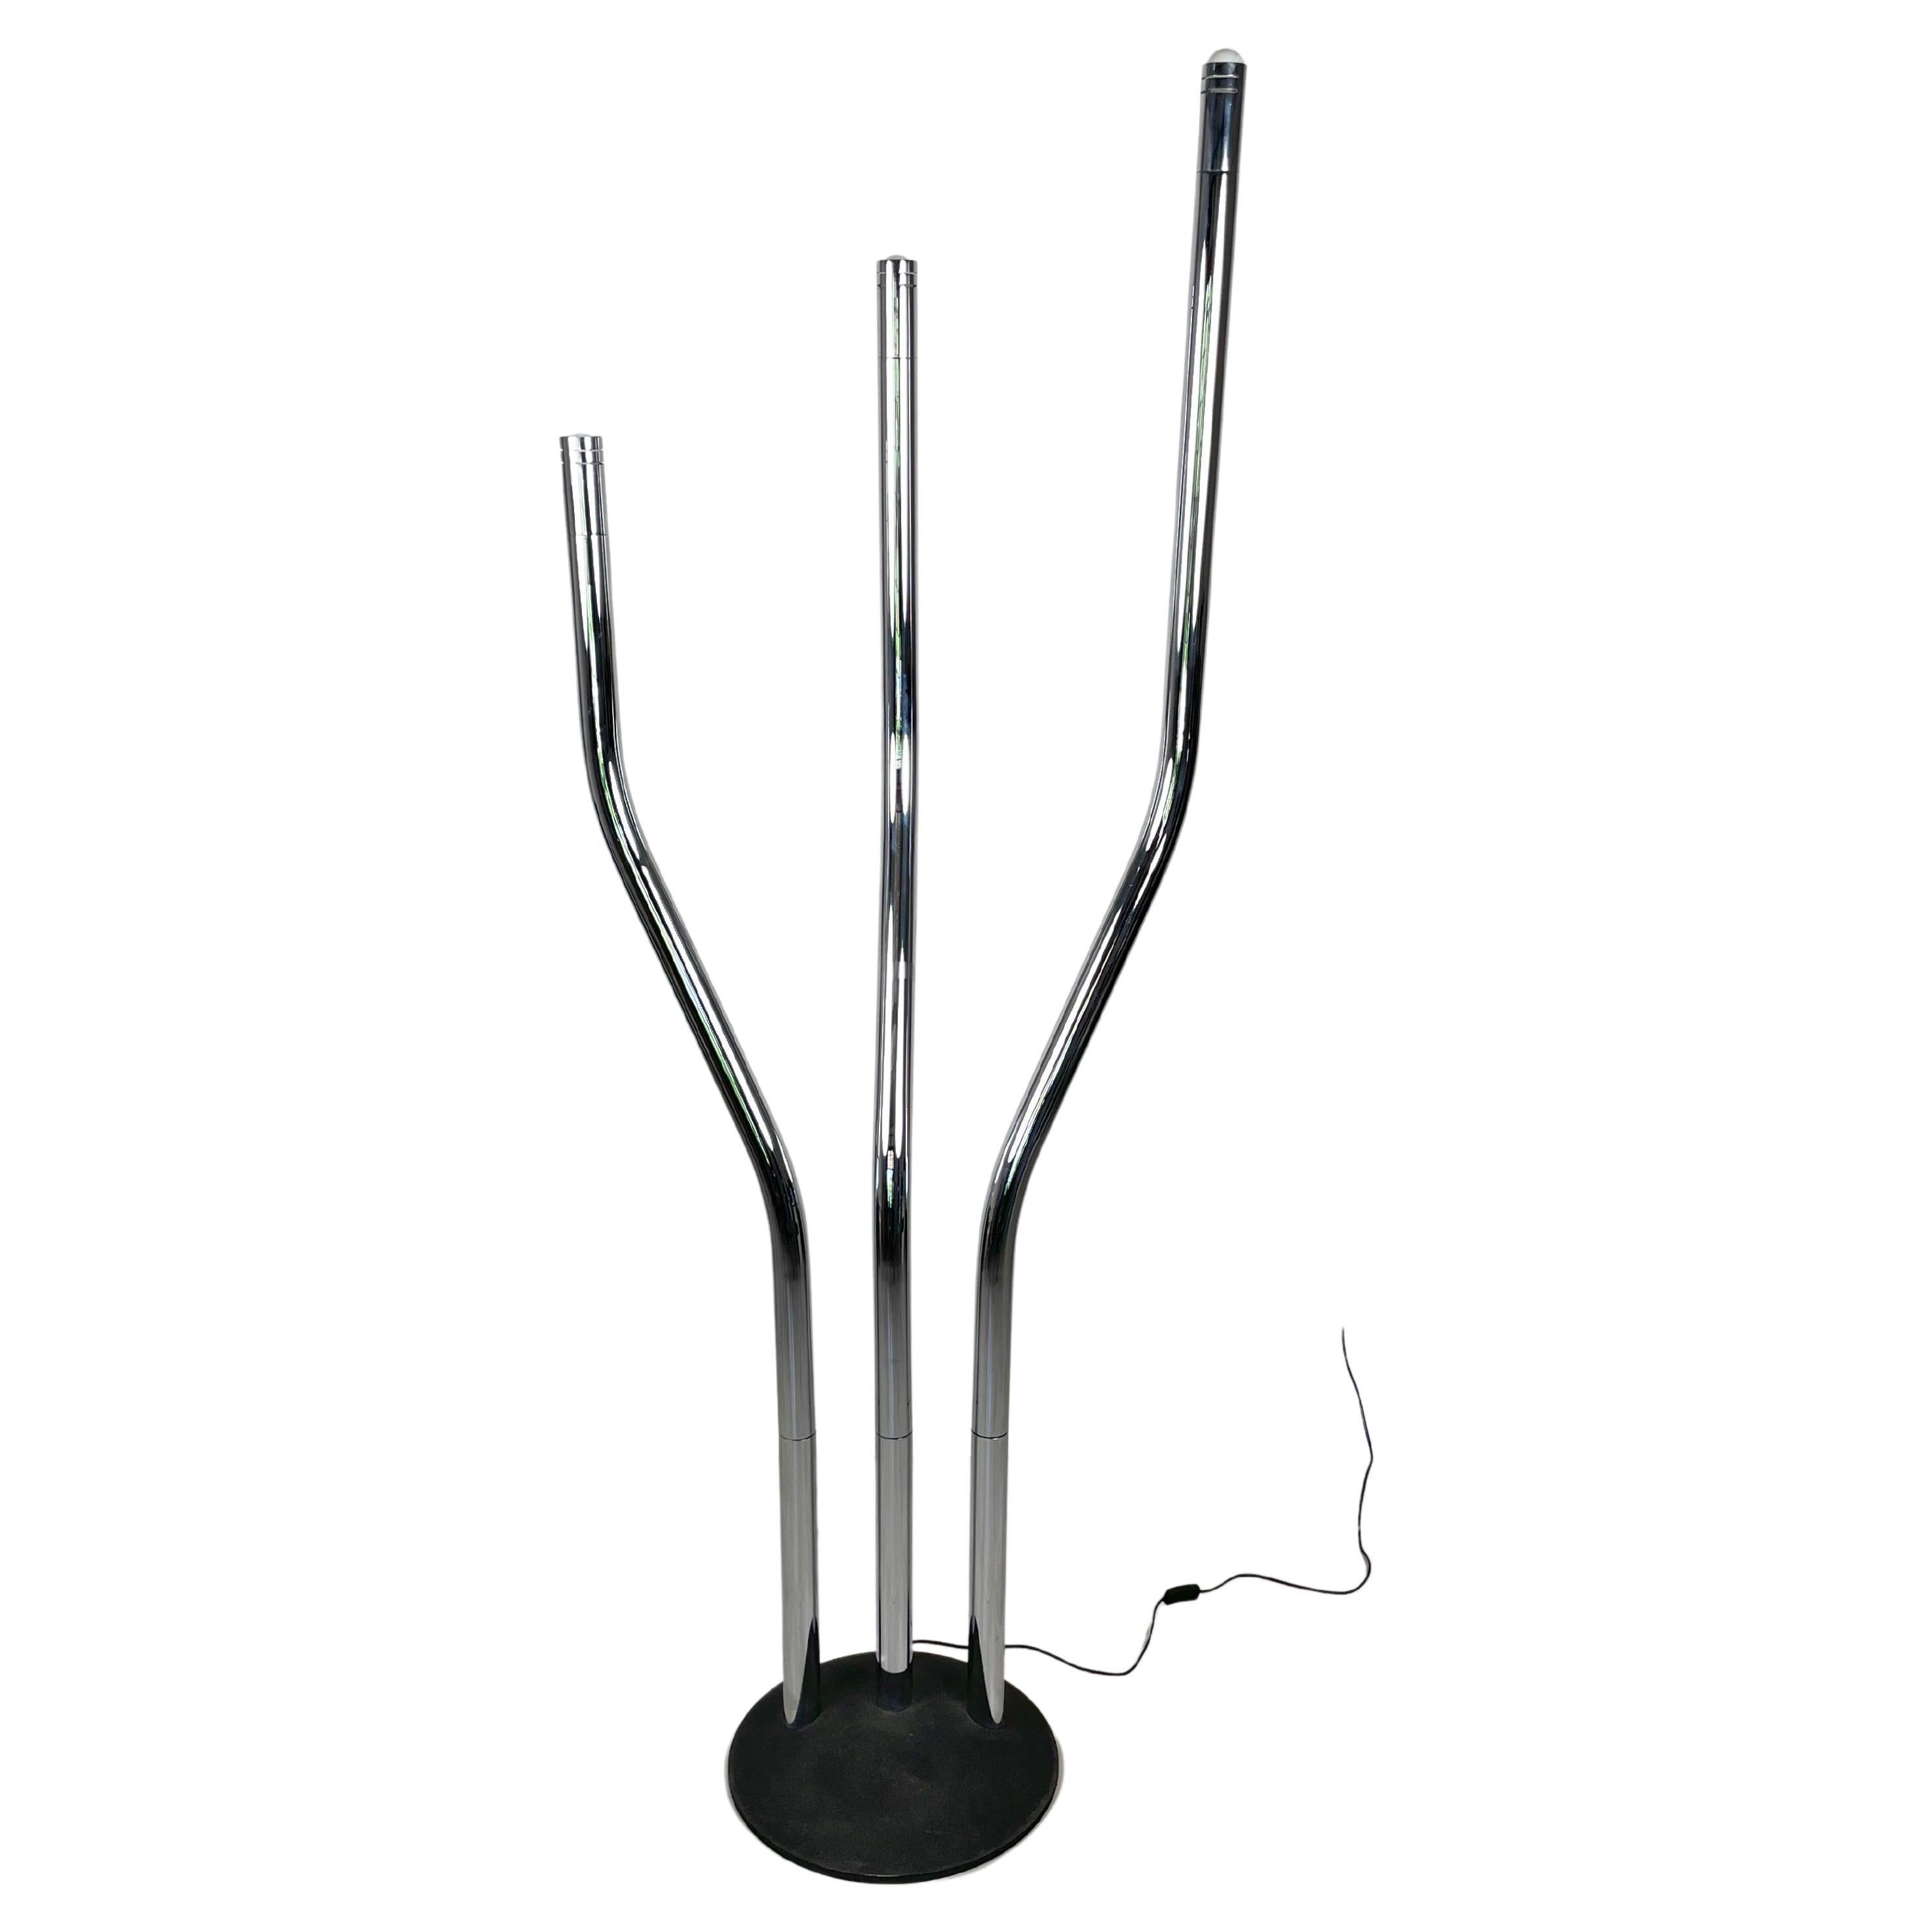 Tall floor lamp featuring three adjustable tubes by the Italian designer Reggiani. 

Made in Italy in the 1970s.